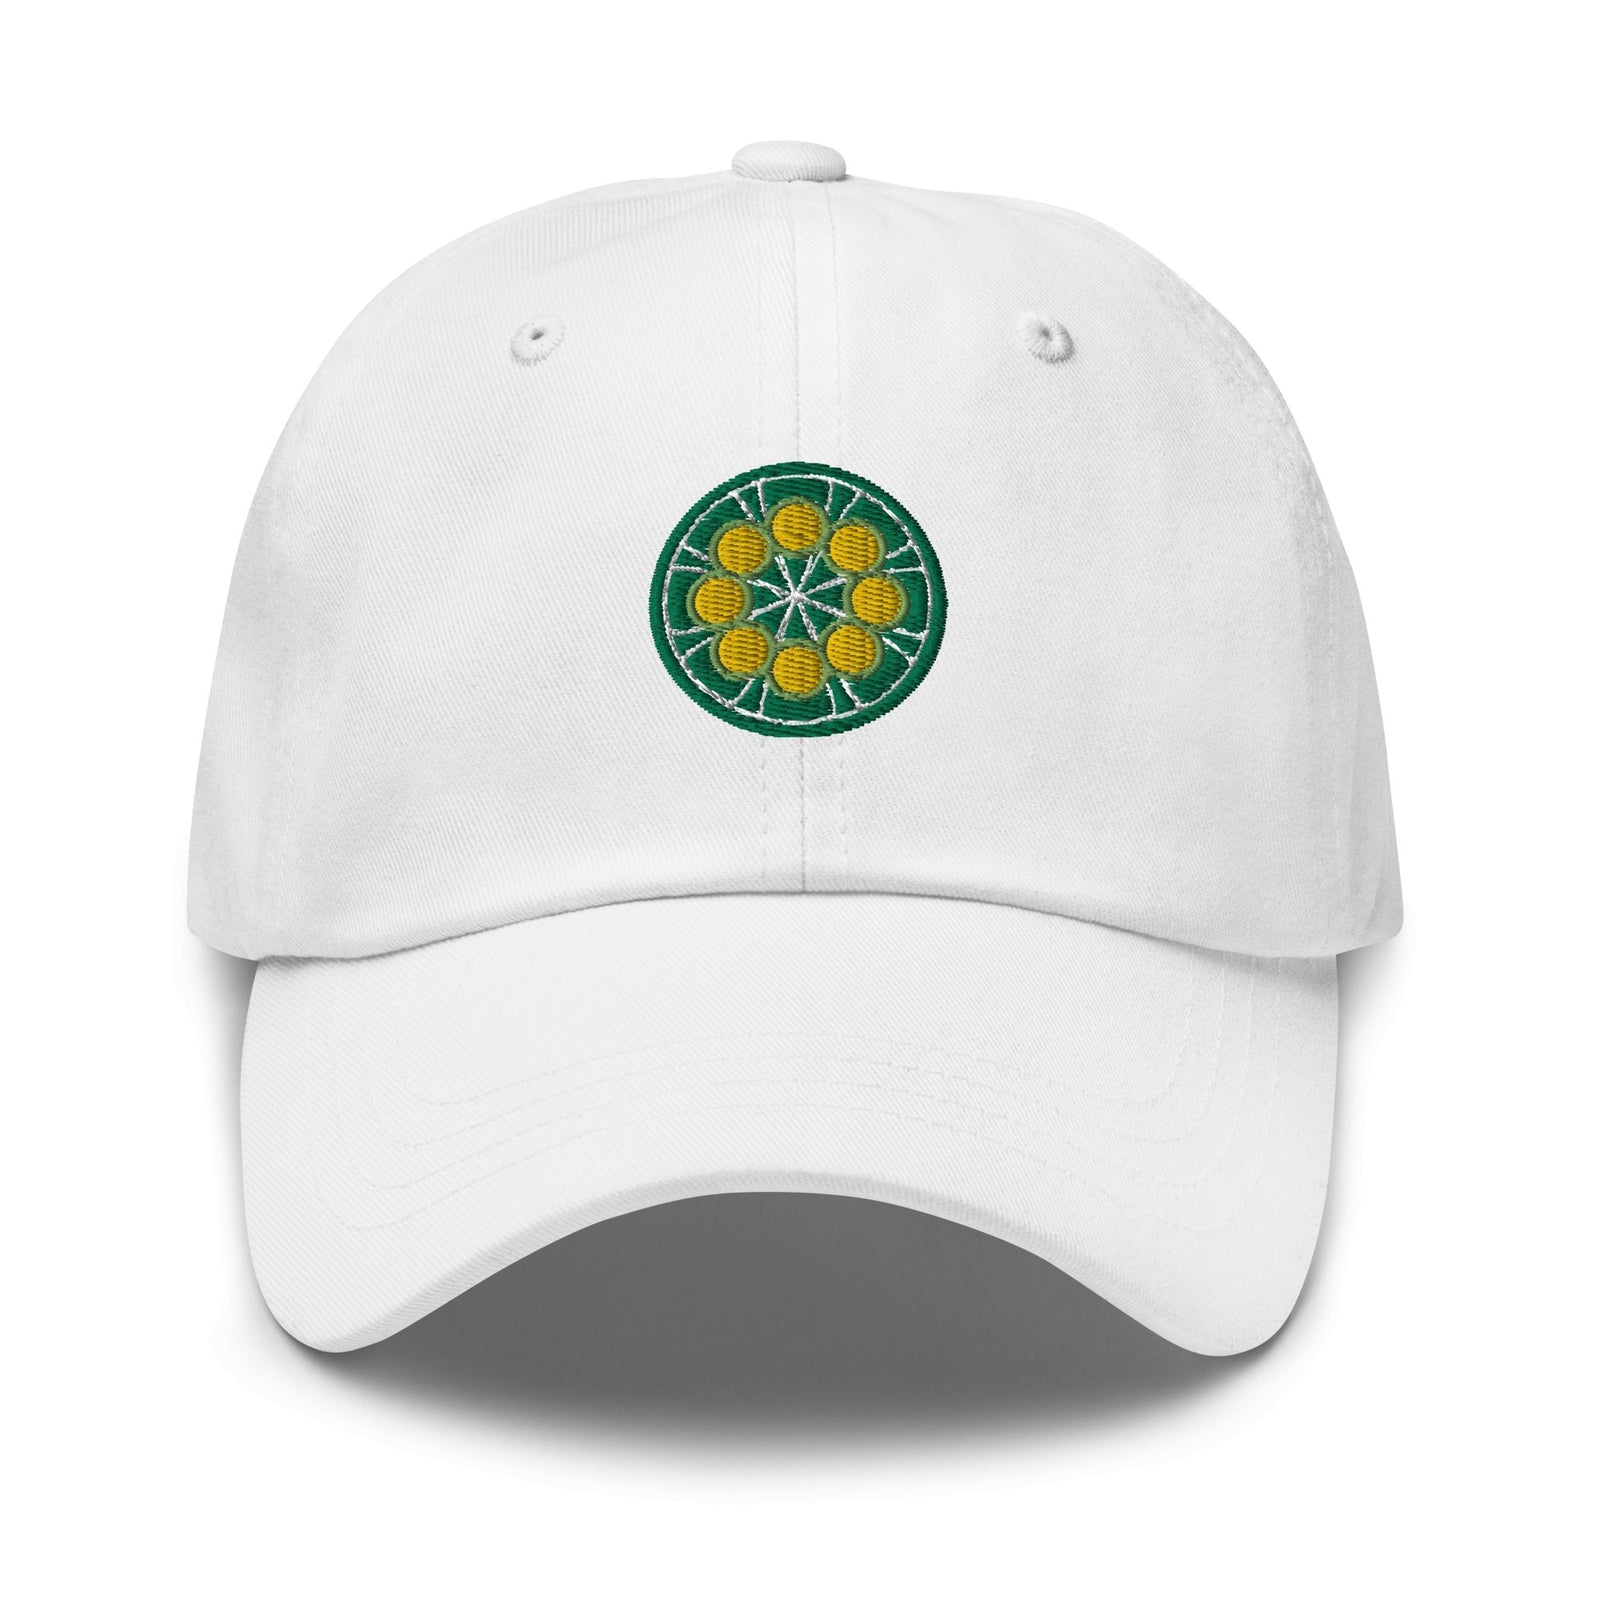 //cdn.shopify.com/s/files/1/0274/2488/2766/products/limewire-dad-hat-434678_5000x.jpg?v=1652292691 5000w,
    //cdn.shopify.com/s/files/1/0274/2488/2766/products/limewire-dad-hat-434678_4500x.jpg?v=1652292691 4500w,
    //cdn.shopify.com/s/files/1/0274/2488/2766/products/limewire-dad-hat-434678_4000x.jpg?v=1652292691 4000w,
    //cdn.shopify.com/s/files/1/0274/2488/2766/products/limewire-dad-hat-434678_3500x.jpg?v=1652292691 3500w,
    //cdn.shopify.com/s/files/1/0274/2488/2766/products/limewire-dad-hat-434678_3000x.jpg?v=1652292691 3000w,
    //cdn.shopify.com/s/files/1/0274/2488/2766/products/limewire-dad-hat-434678_2500x.jpg?v=1652292691 2500w,
    //cdn.shopify.com/s/files/1/0274/2488/2766/products/limewire-dad-hat-434678_2000x.jpg?v=1652292691 2000w,
    //cdn.shopify.com/s/files/1/0274/2488/2766/products/limewire-dad-hat-434678_1800x.jpg?v=1652292691 1800w,
    //cdn.shopify.com/s/files/1/0274/2488/2766/products/limewire-dad-hat-434678_1600x.jpg?v=1652292691 1600w,
    //cdn.shopify.com/s/files/1/0274/2488/2766/products/limewire-dad-hat-434678_1400x.jpg?v=1652292691 1400w,
    //cdn.shopify.com/s/files/1/0274/2488/2766/products/limewire-dad-hat-434678_1200x.jpg?v=1652292691 1200w,
    //cdn.shopify.com/s/files/1/0274/2488/2766/products/limewire-dad-hat-434678_1000x.jpg?v=1652292691 1000w,
    //cdn.shopify.com/s/files/1/0274/2488/2766/products/limewire-dad-hat-434678_800x.jpg?v=1652292691 800w,
    //cdn.shopify.com/s/files/1/0274/2488/2766/products/limewire-dad-hat-434678_600x.jpg?v=1652292691 600w,
    //cdn.shopify.com/s/files/1/0274/2488/2766/products/limewire-dad-hat-434678_400x.jpg?v=1652292691 400w,
    //cdn.shopify.com/s/files/1/0274/2488/2766/products/limewire-dad-hat-434678_200x.jpg?v=1652292691 200w